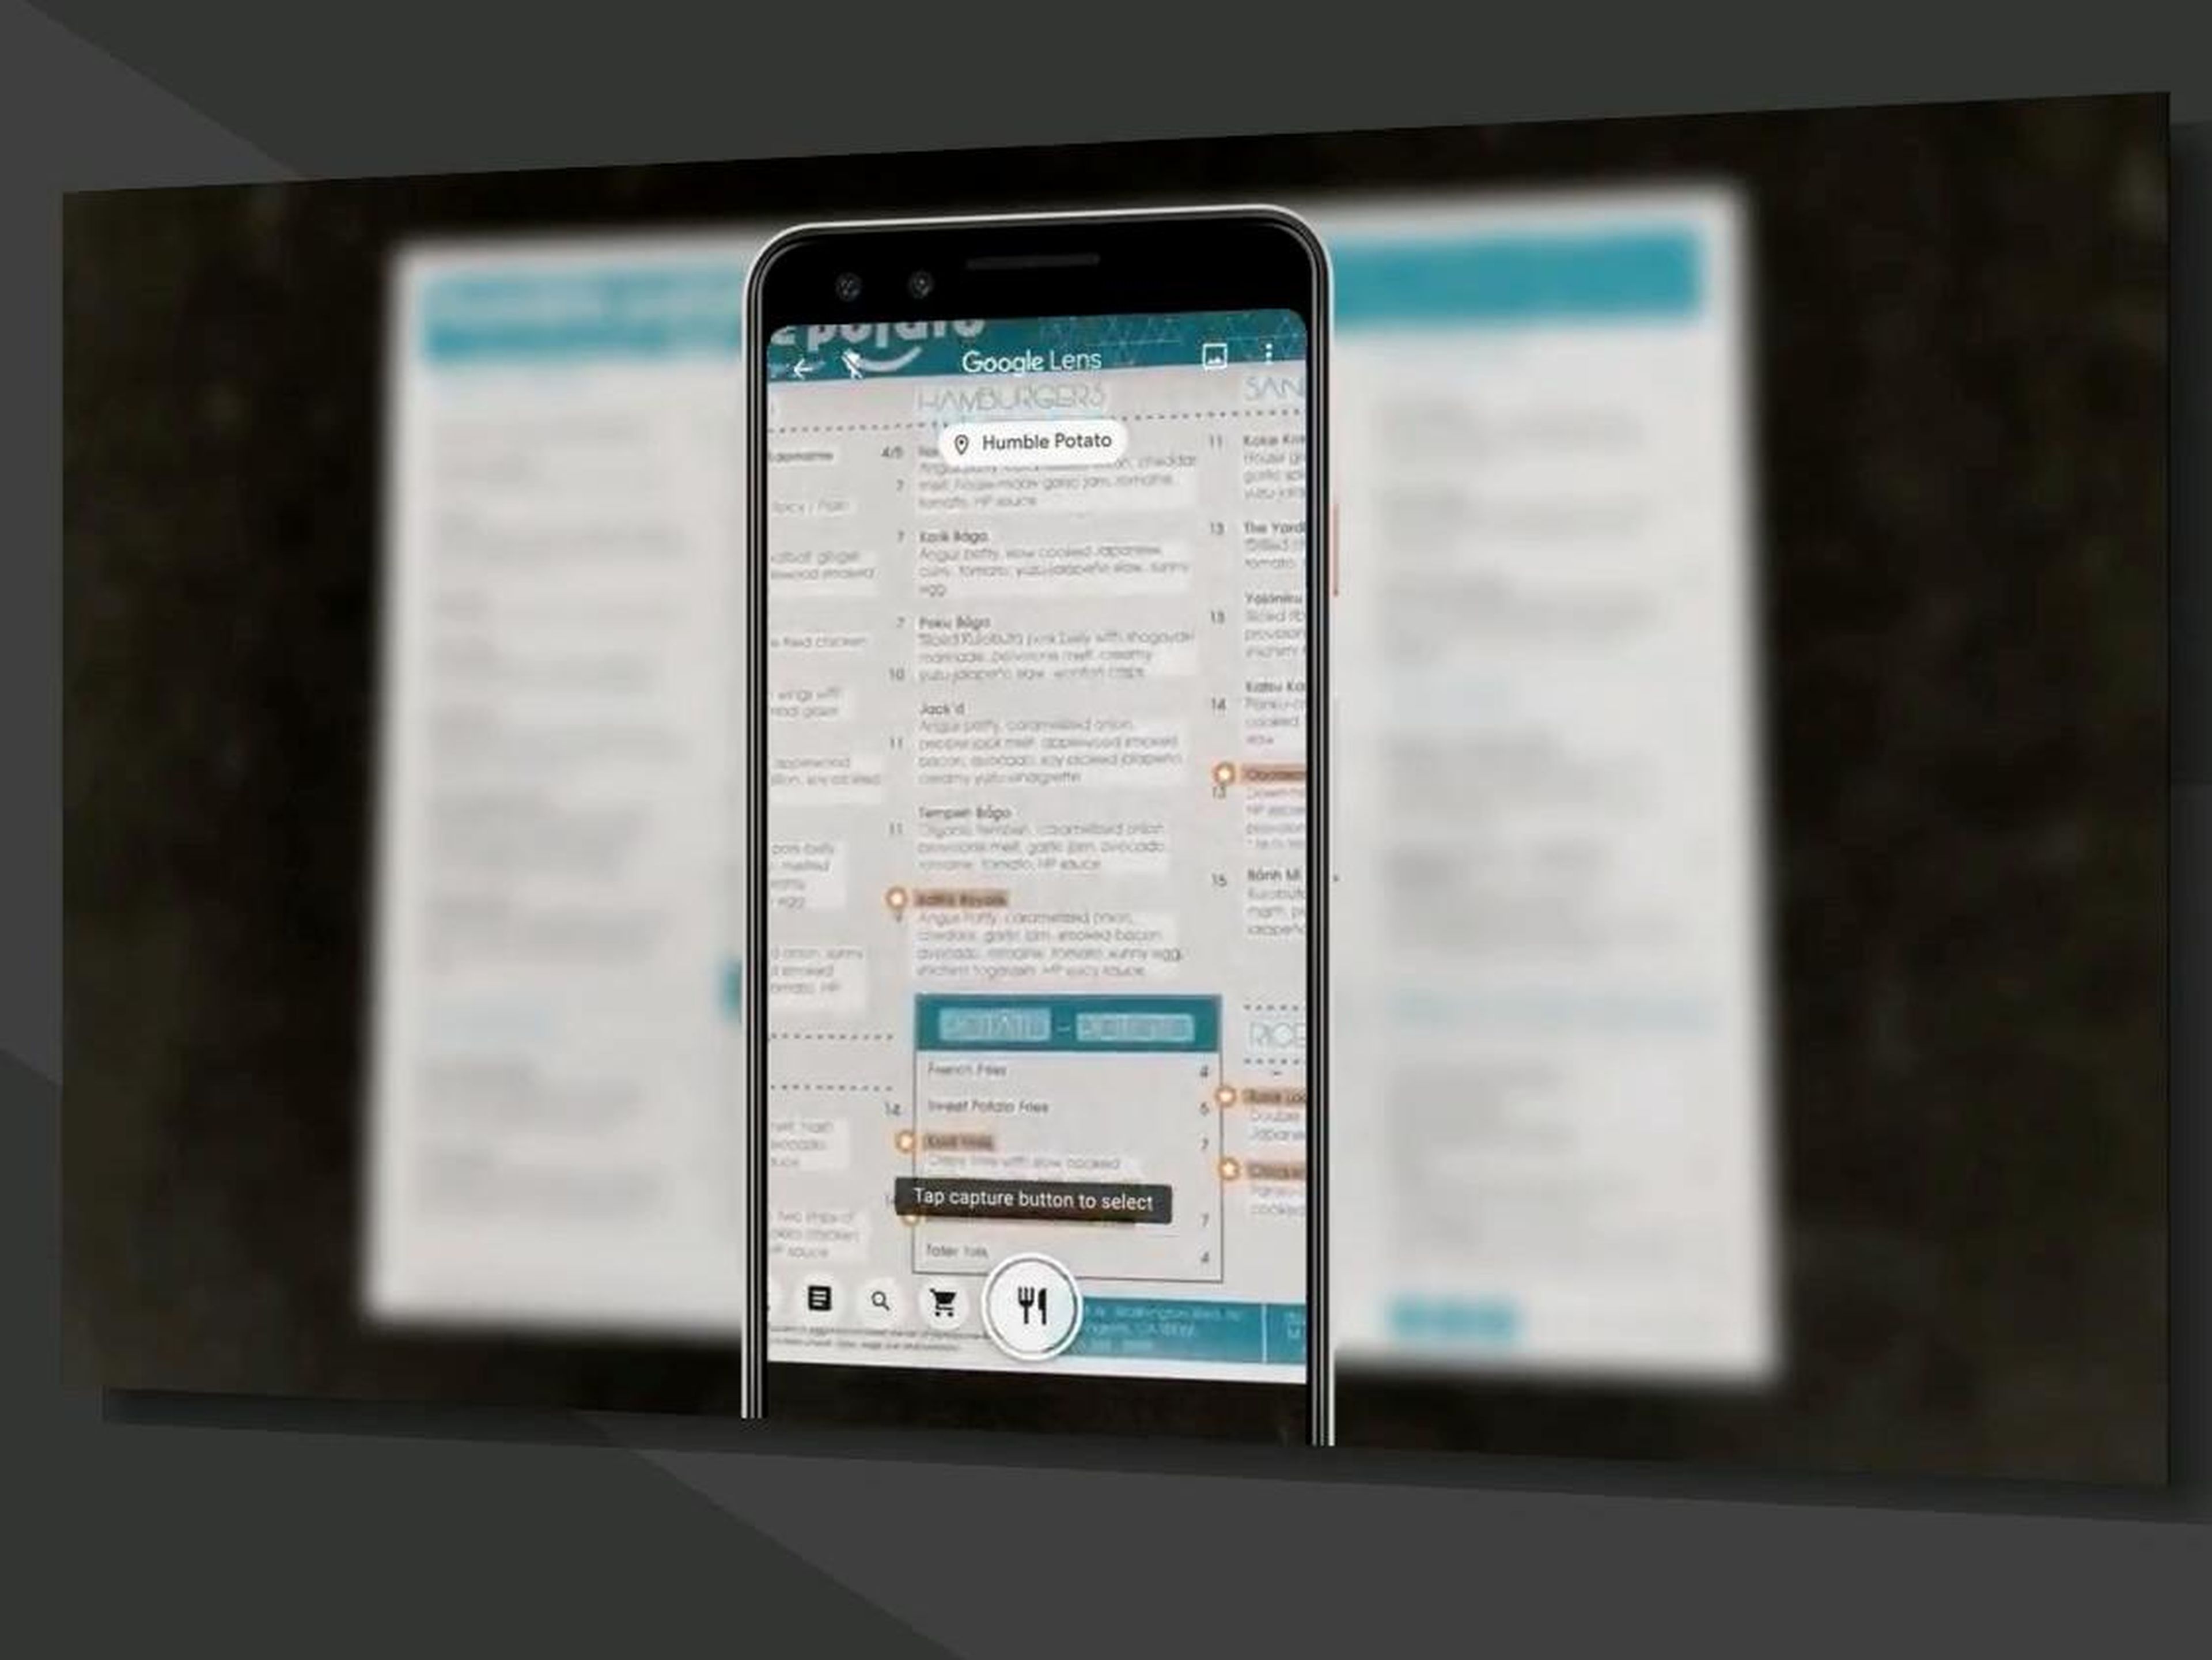 You'll be able to point your phone's camera at a menu, and Lens will automatically highlight popular dishes.